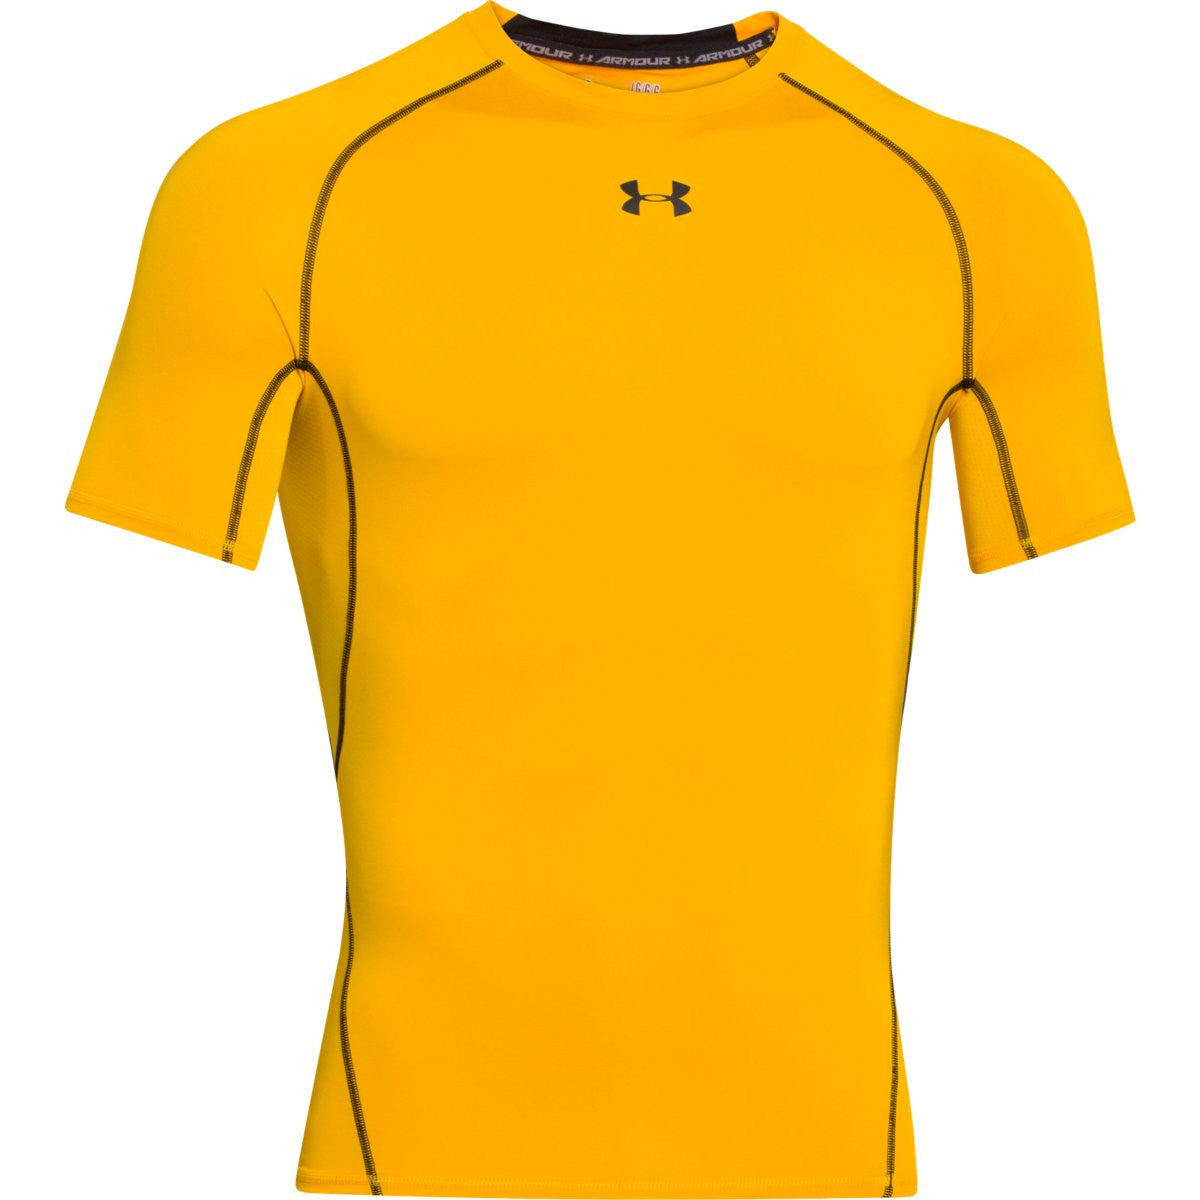 Under Armour Men's Yellow HeatGear Armour S/S Compression Shirt